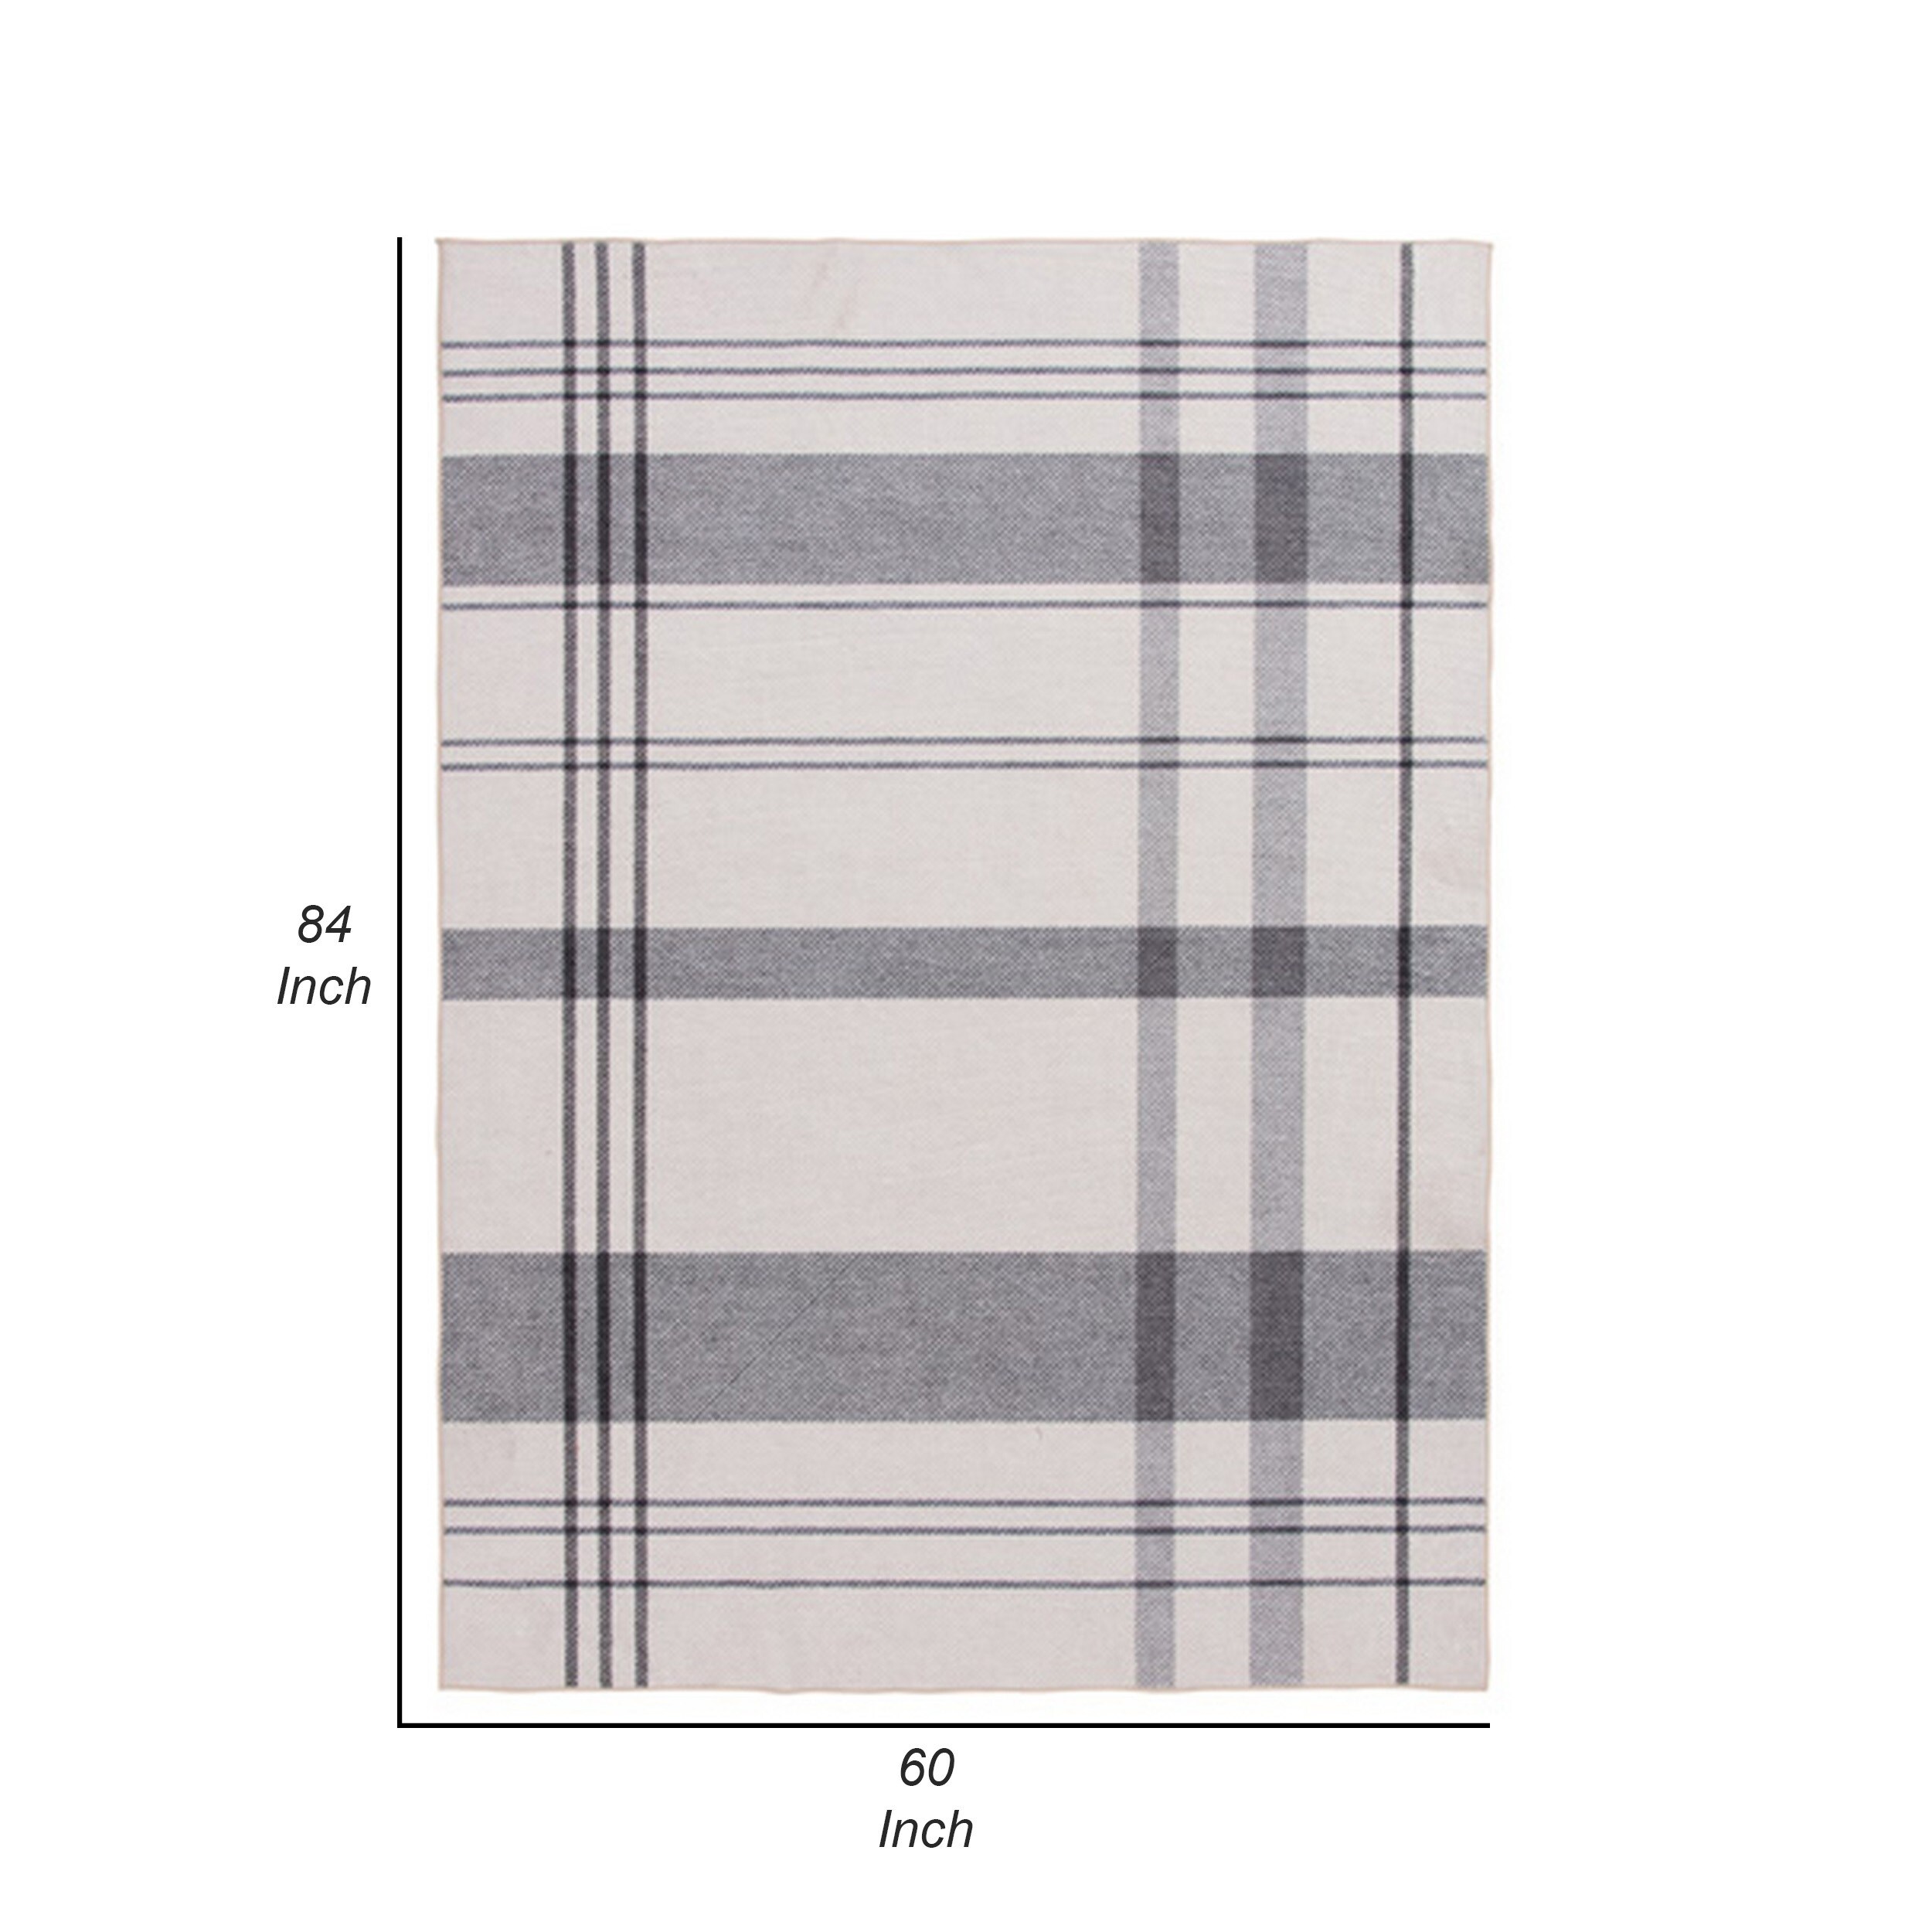 Kay 5 x 7 Area Rug, Classic Plaid Print, Soft Gray and White Polyester - 5' x 7'